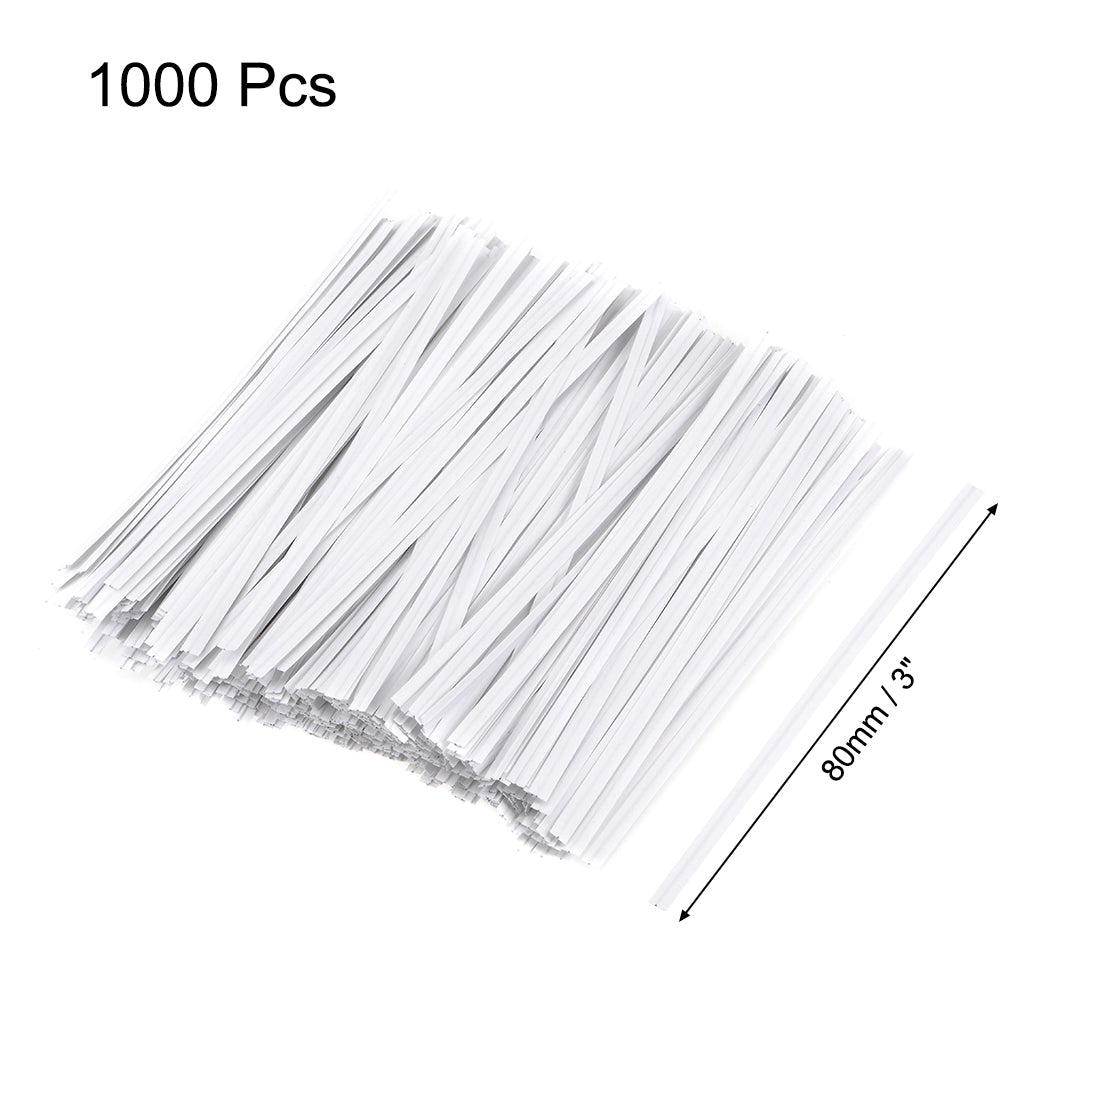 uxcell Uxcell Long Strong Twist Ties 3.15 Inches Quality  Closure Tie for Tying Gift Bags Art Craft Ties Manage Cords White 1000pcs